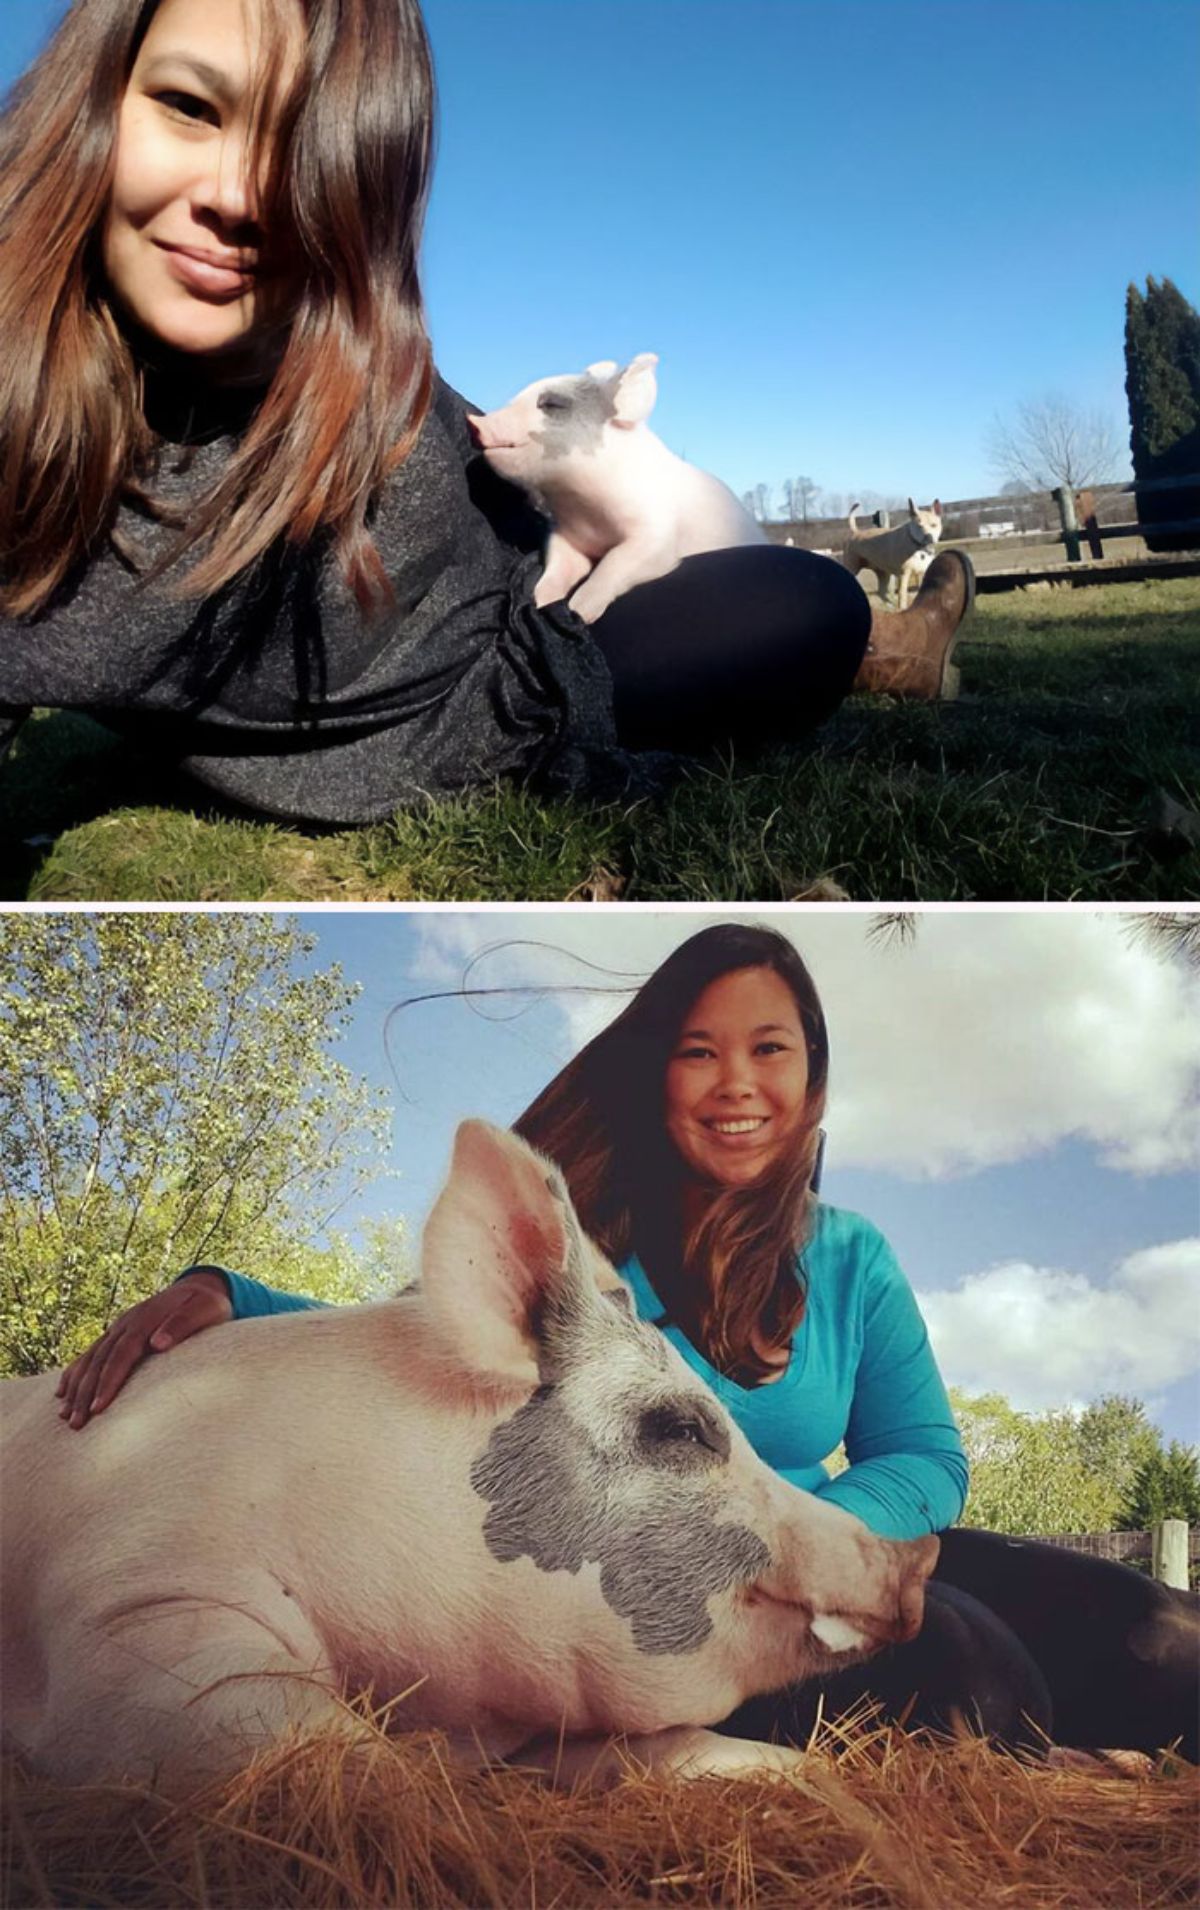 2 photos of a woman with a white and black piglet and the grown up version of the pig